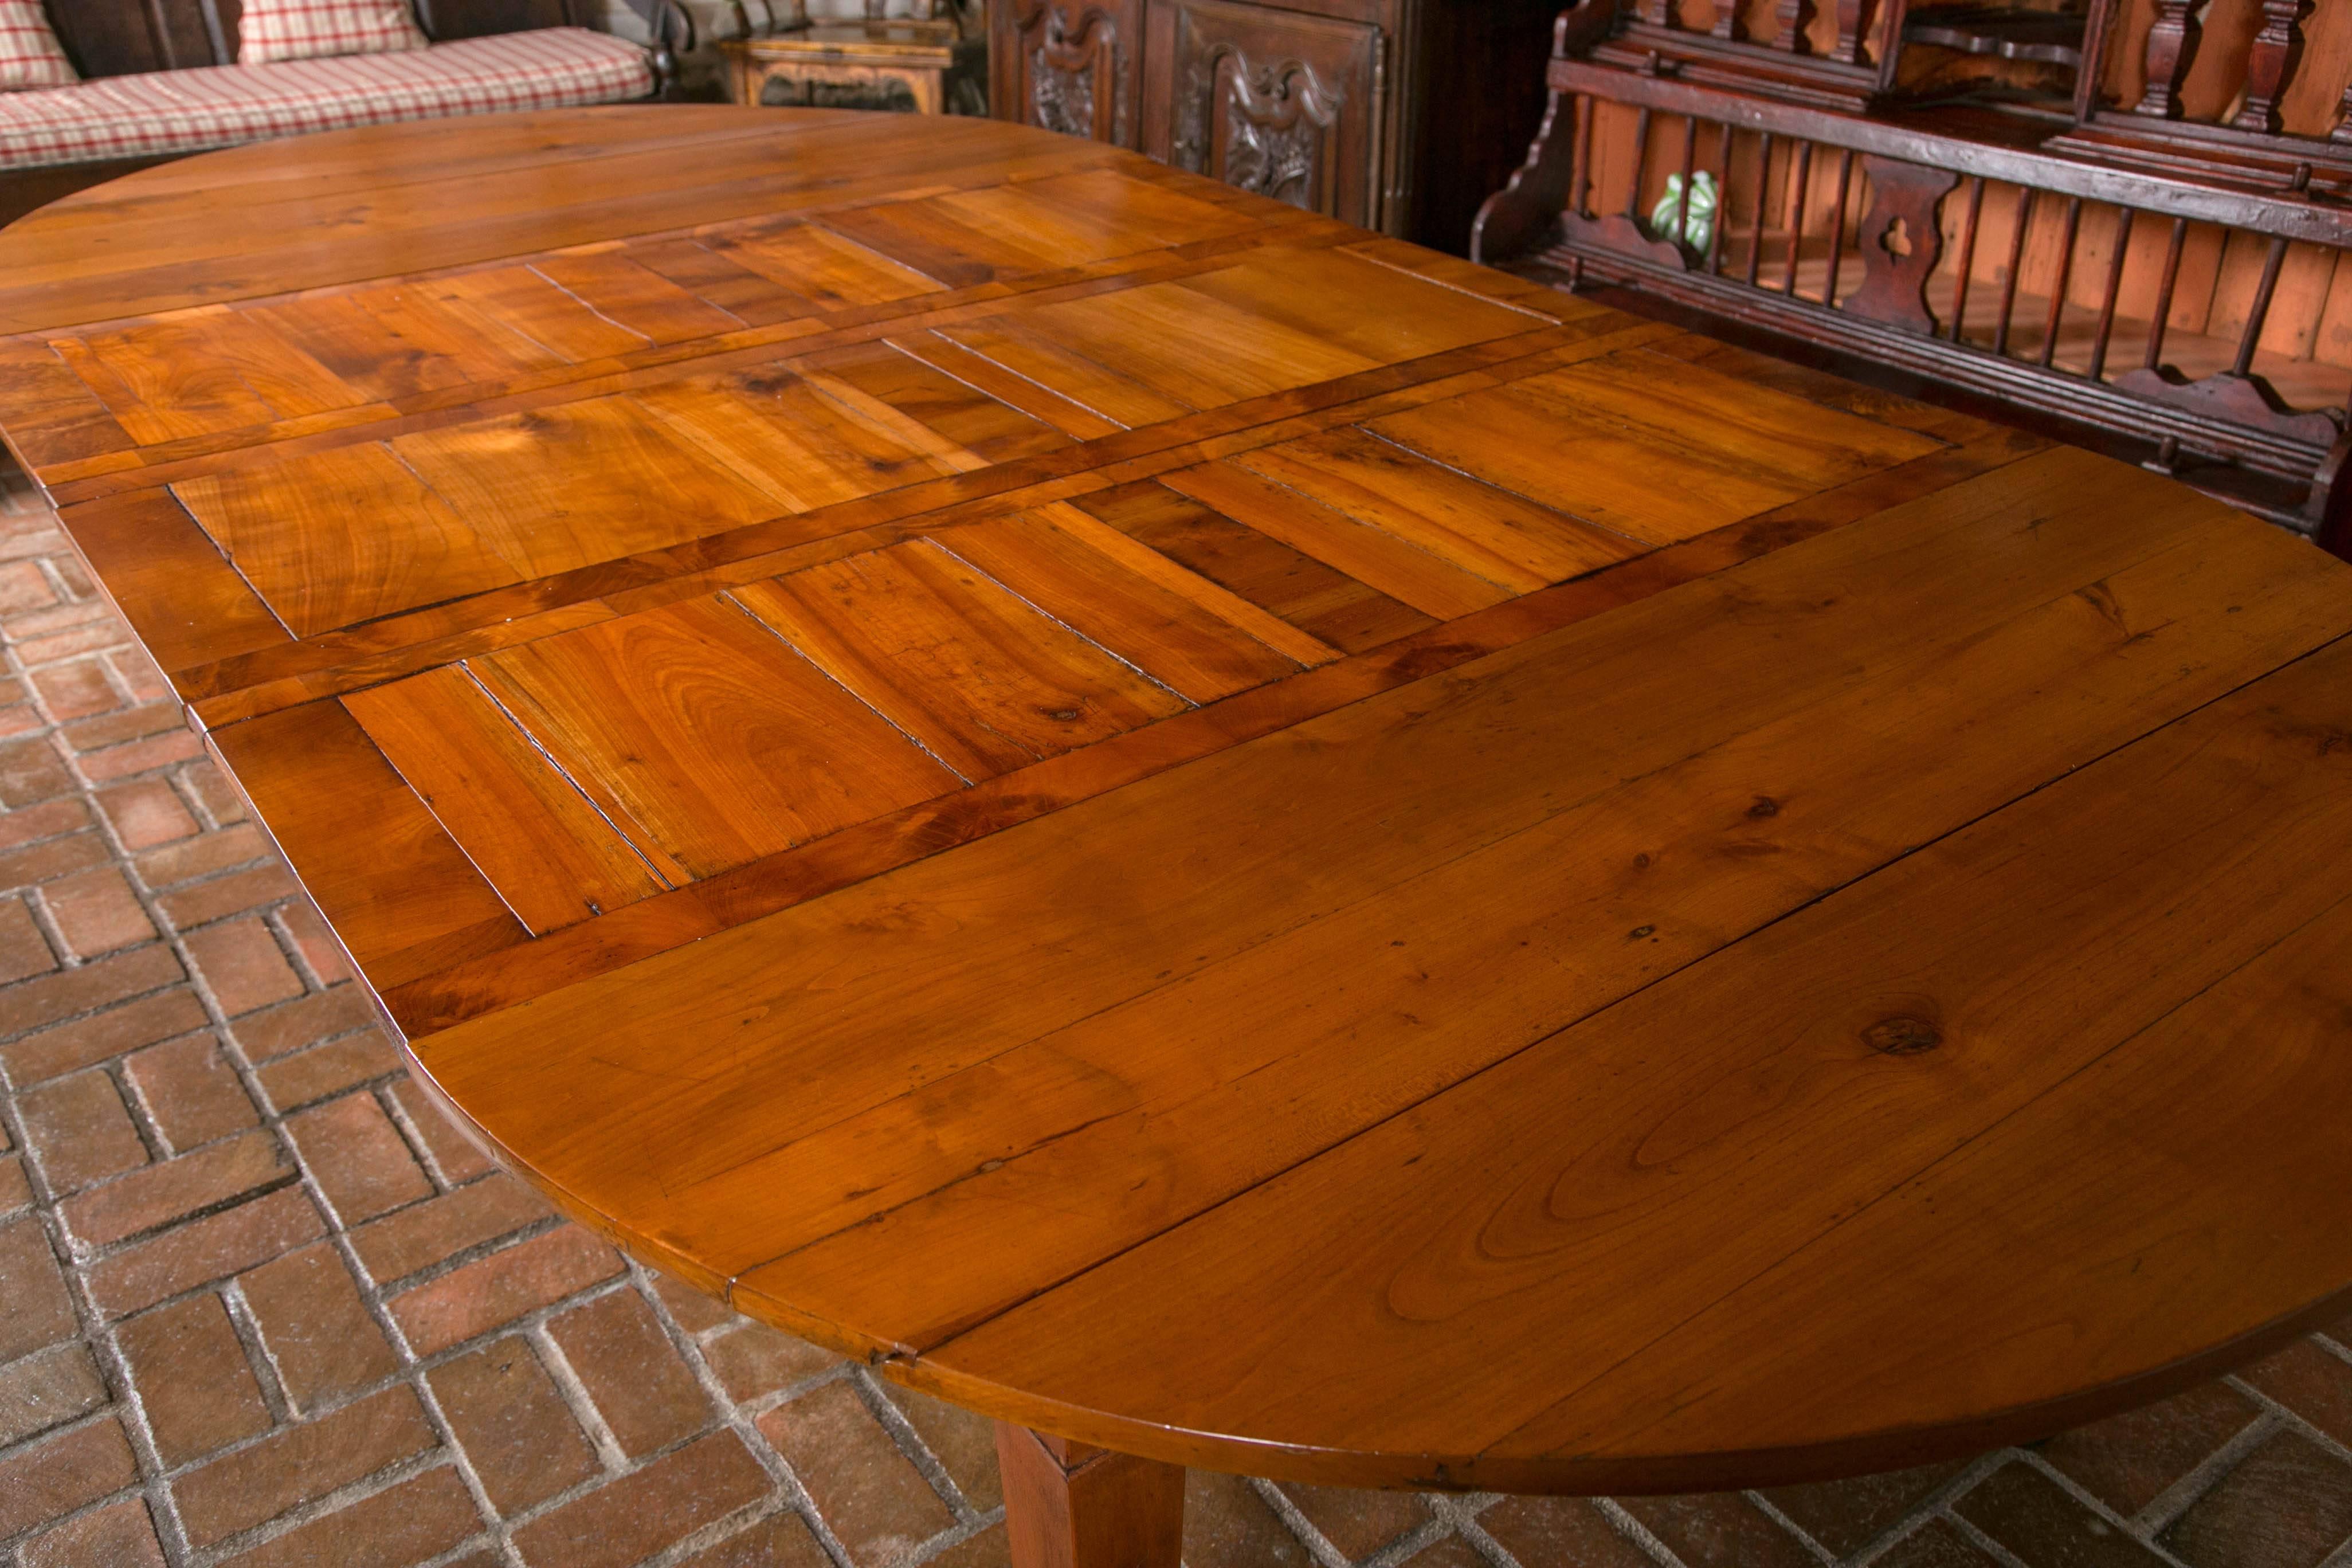 An enterprising person a long time ago decided not to hide the fact he was creating an extension table by incorporating shutter style leaves and telescoping support frame. The result is an unique adaptation of a French cherry drop leaf table with a